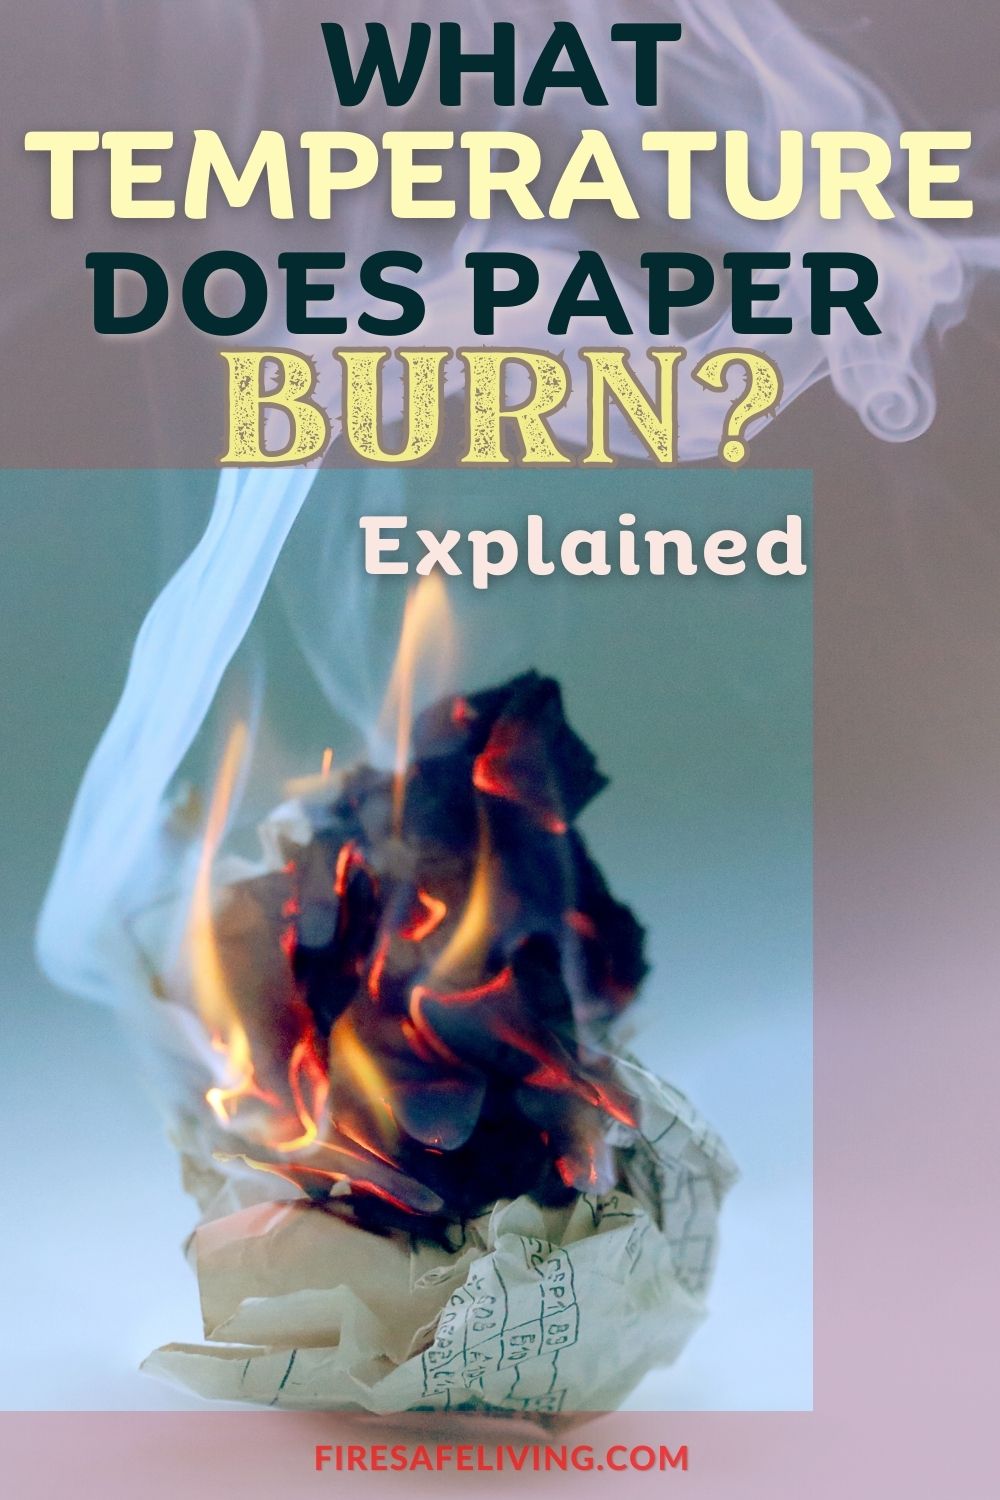 What Temperature Does Paper Burn Explained Pin Image